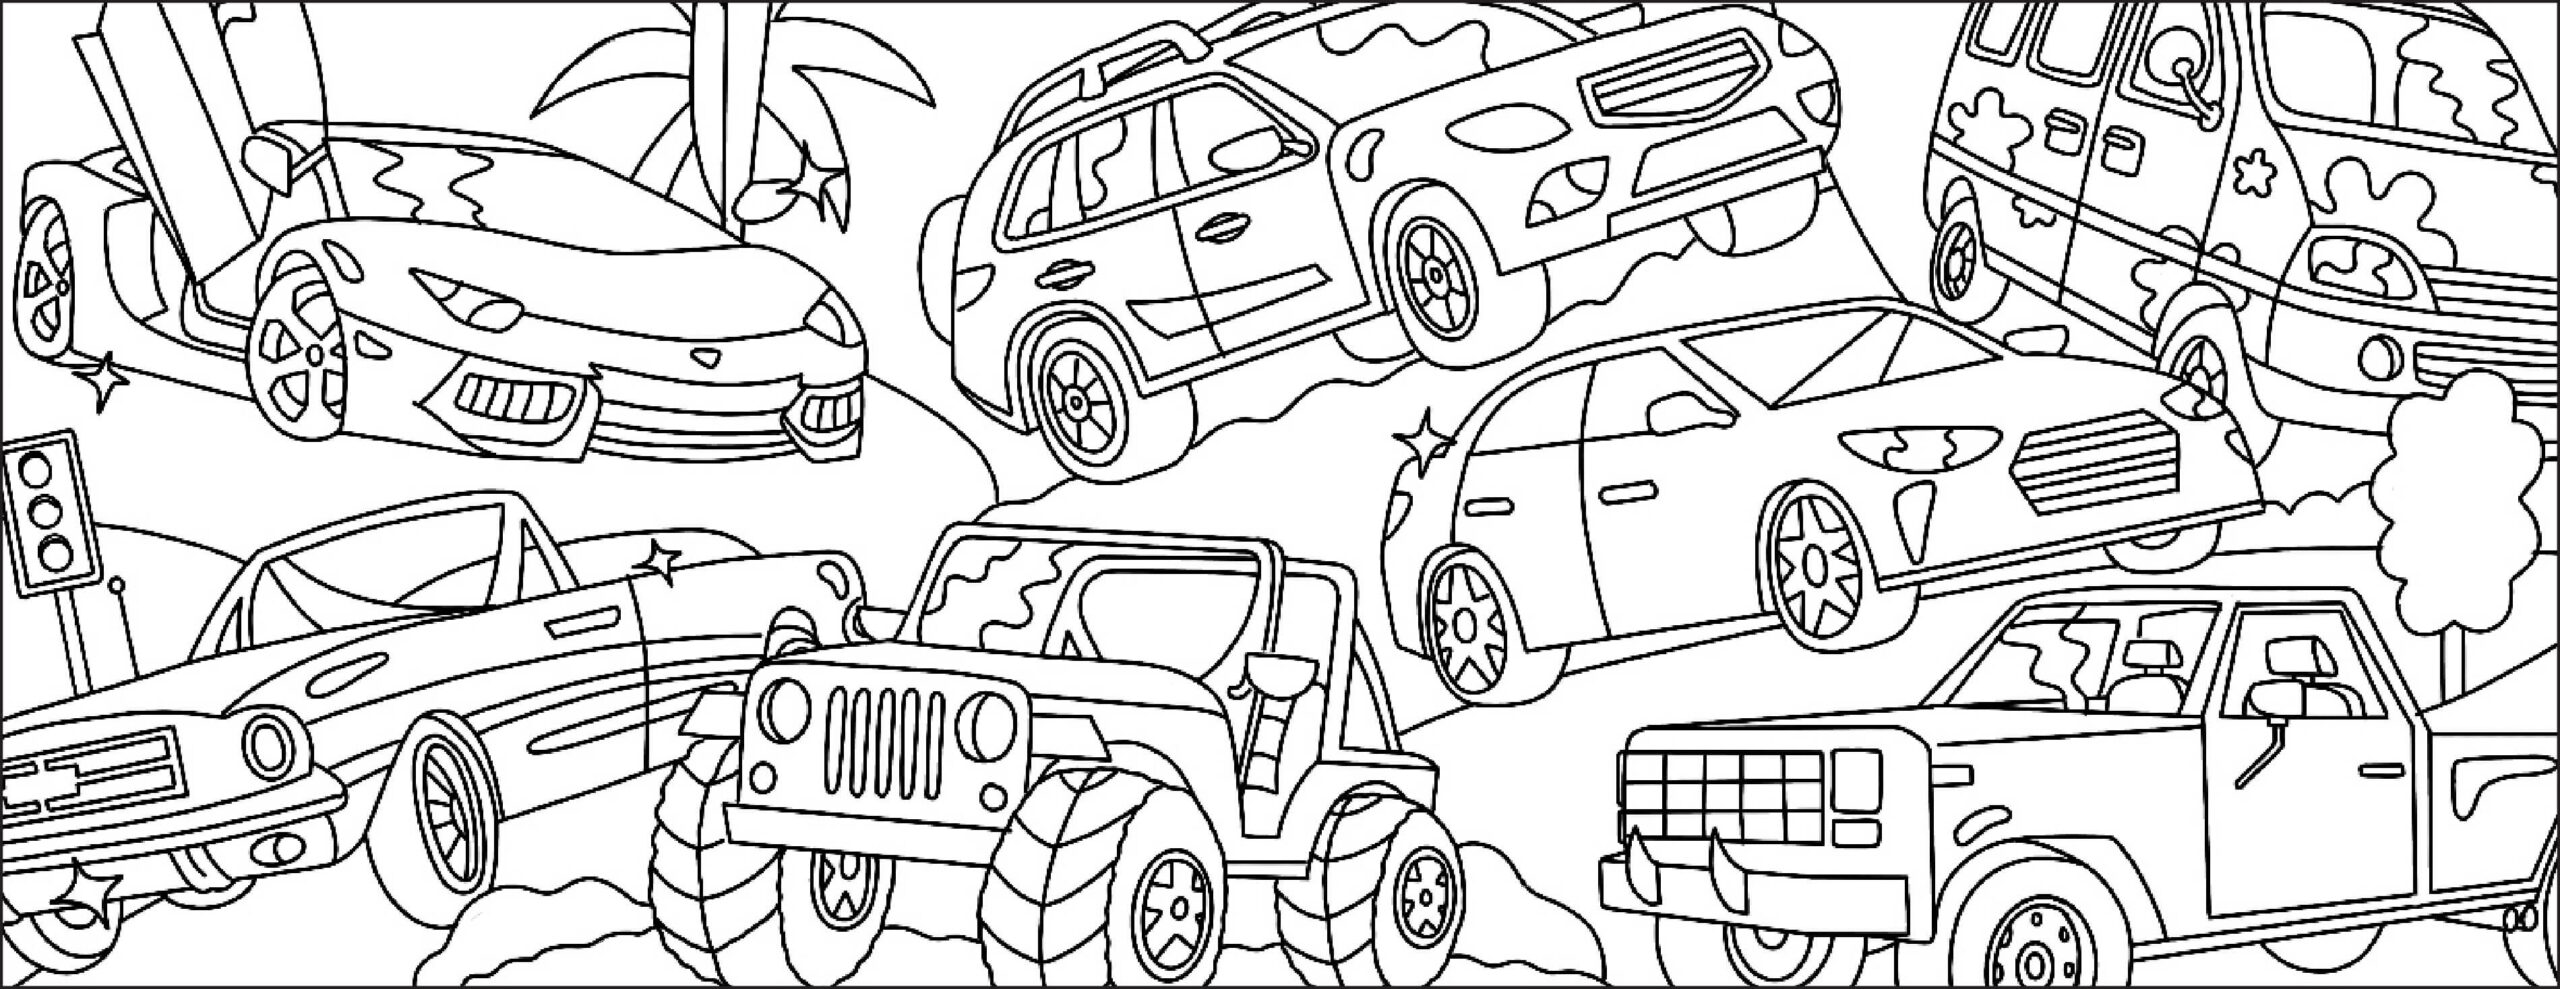 cars-sketches-13